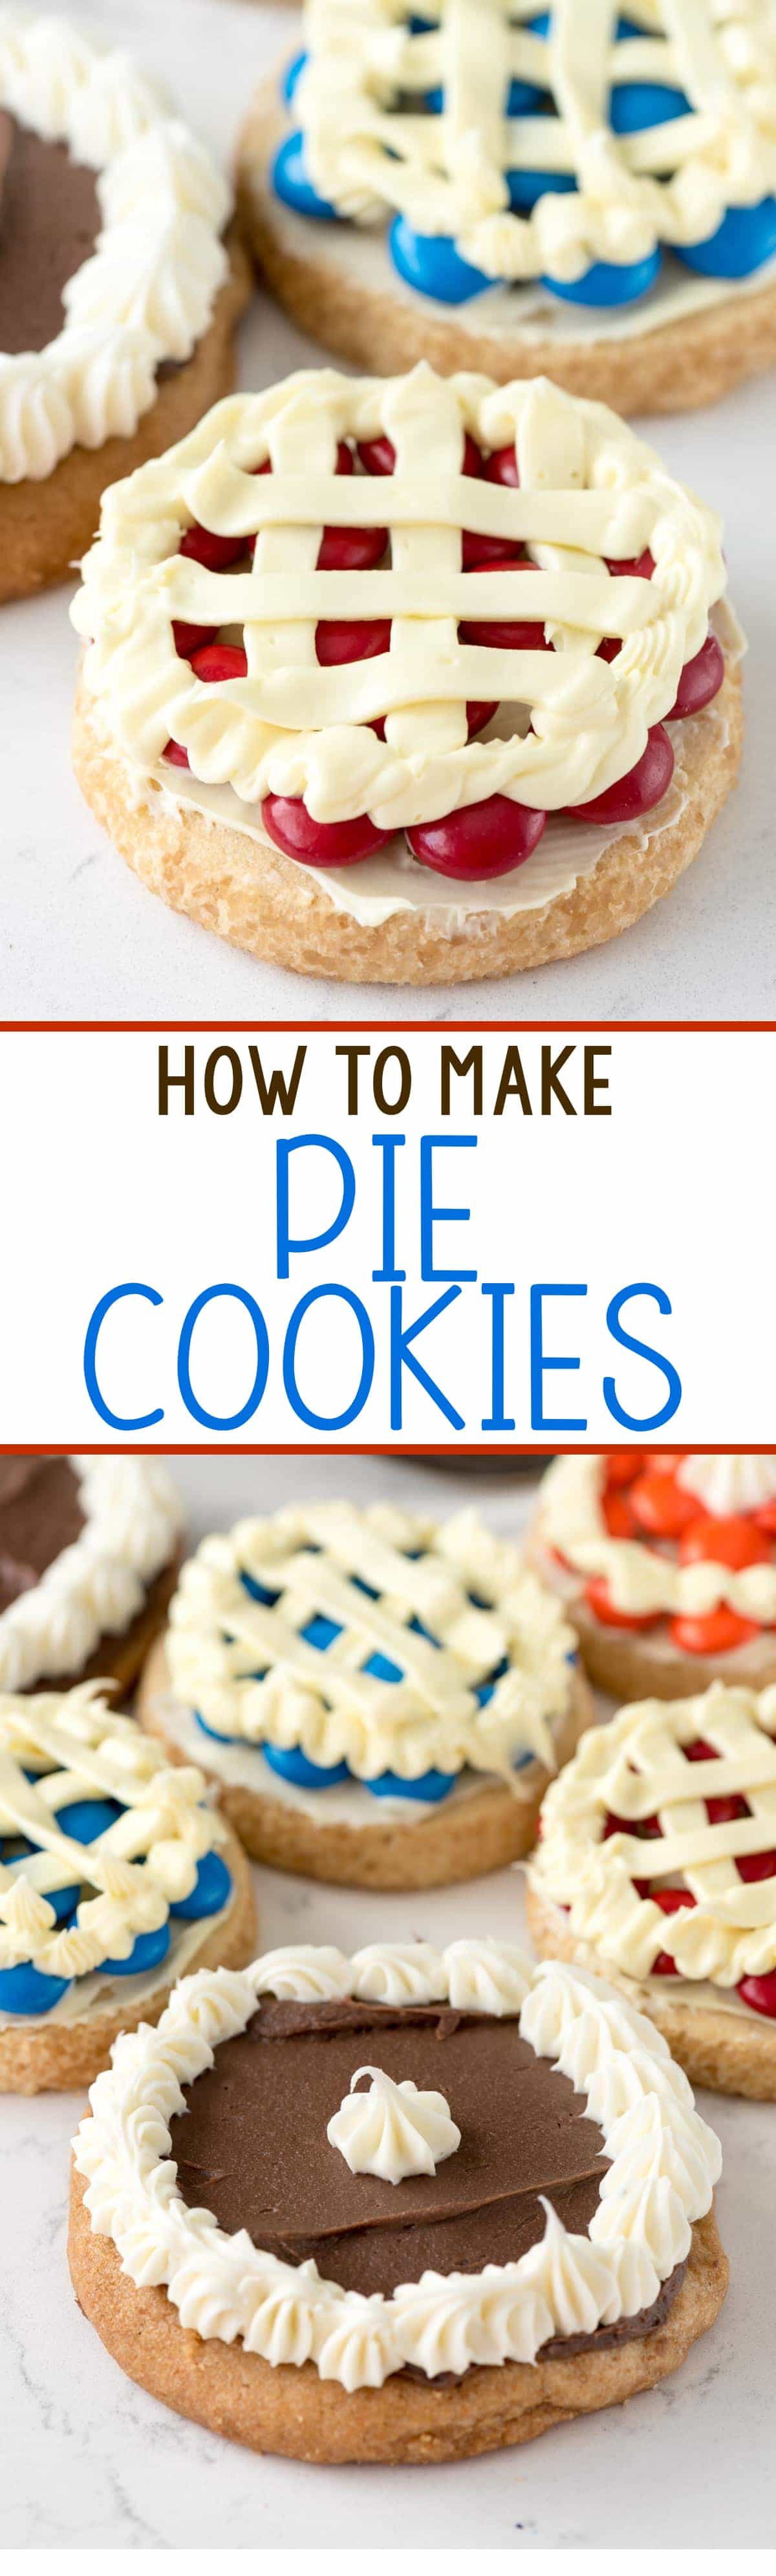 How to make Pie Cookies - this easy and fun cookie recipe makes your favorite cookies look like pie with just a few ingredients!